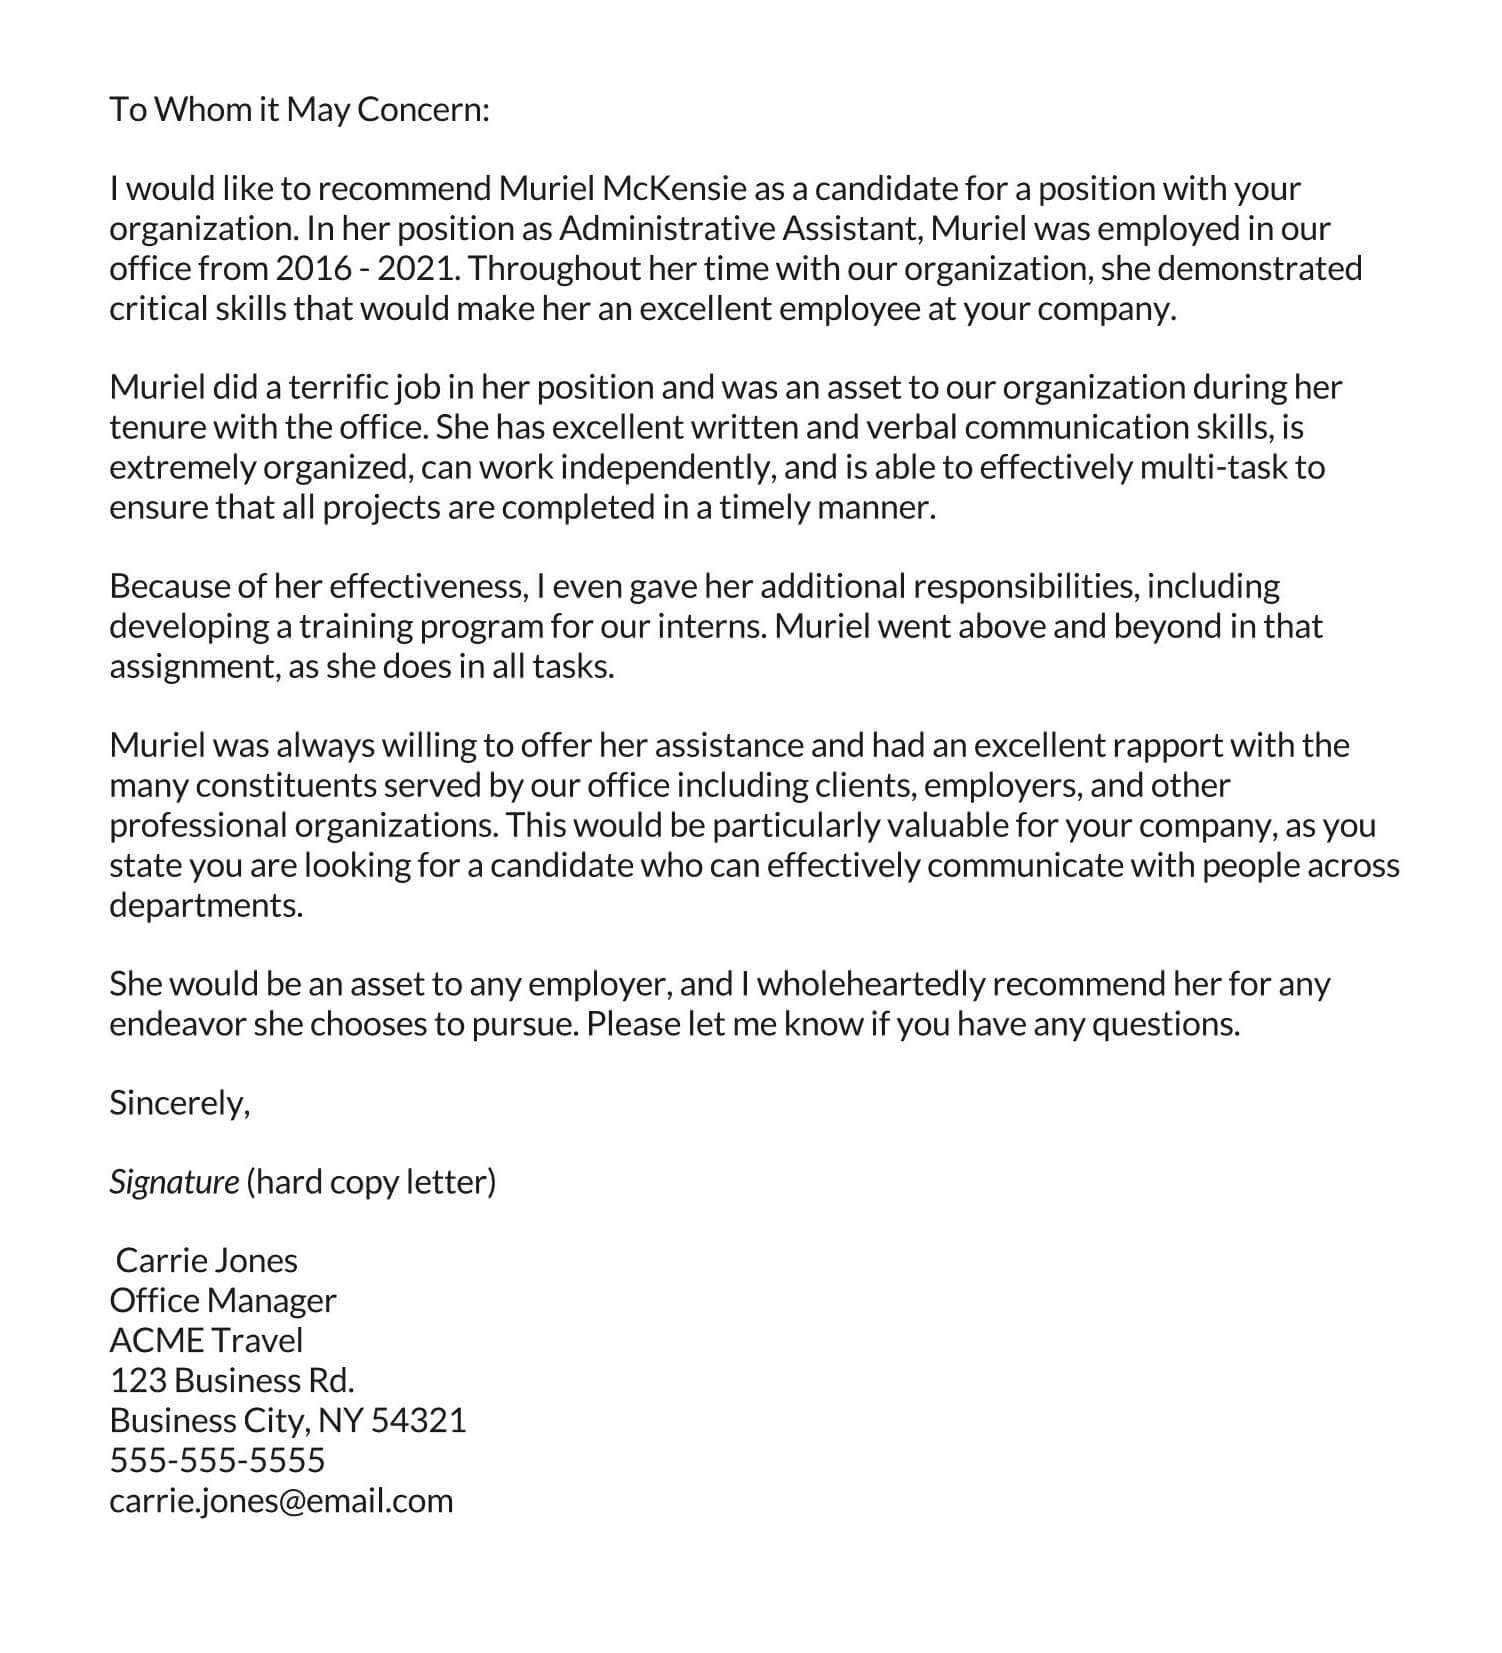 Professional Reference Letter - Free Sample